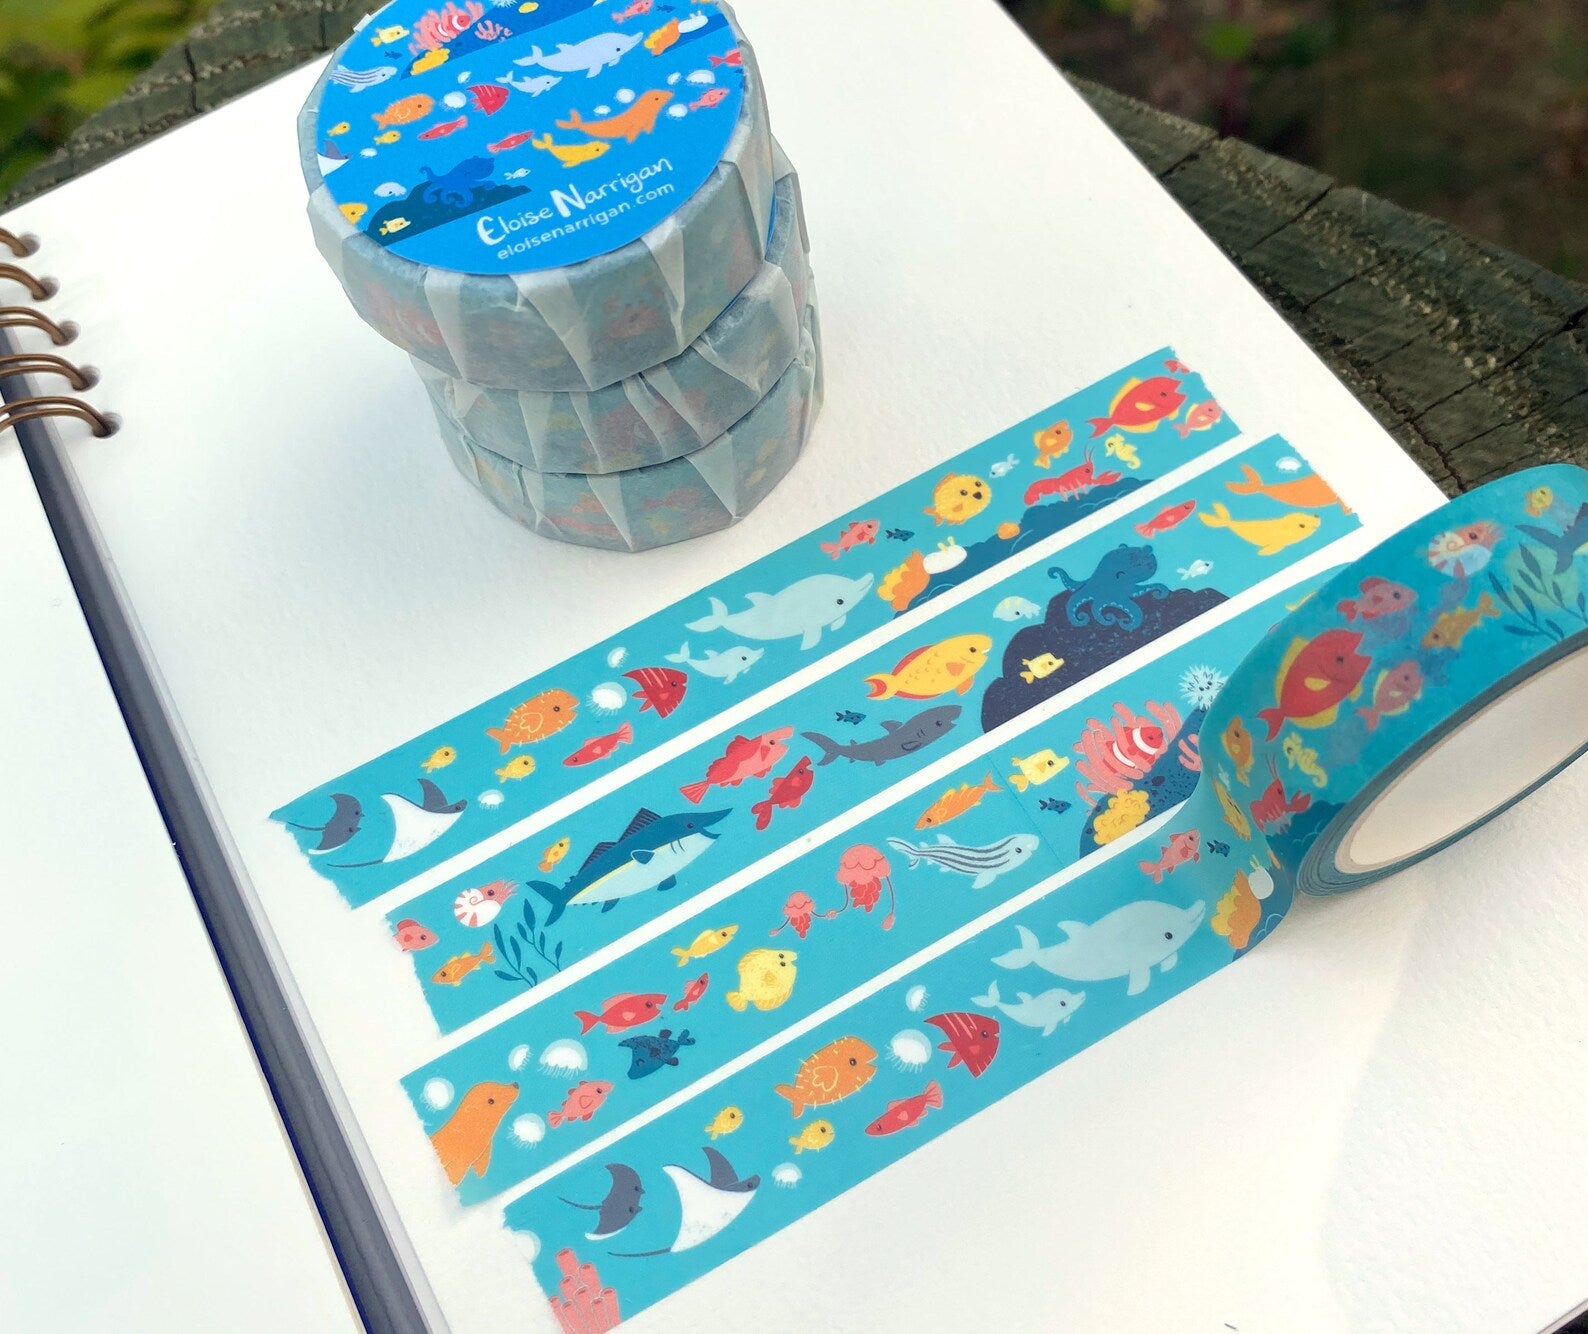 Decorative tape with blue background with images of ocean animals.